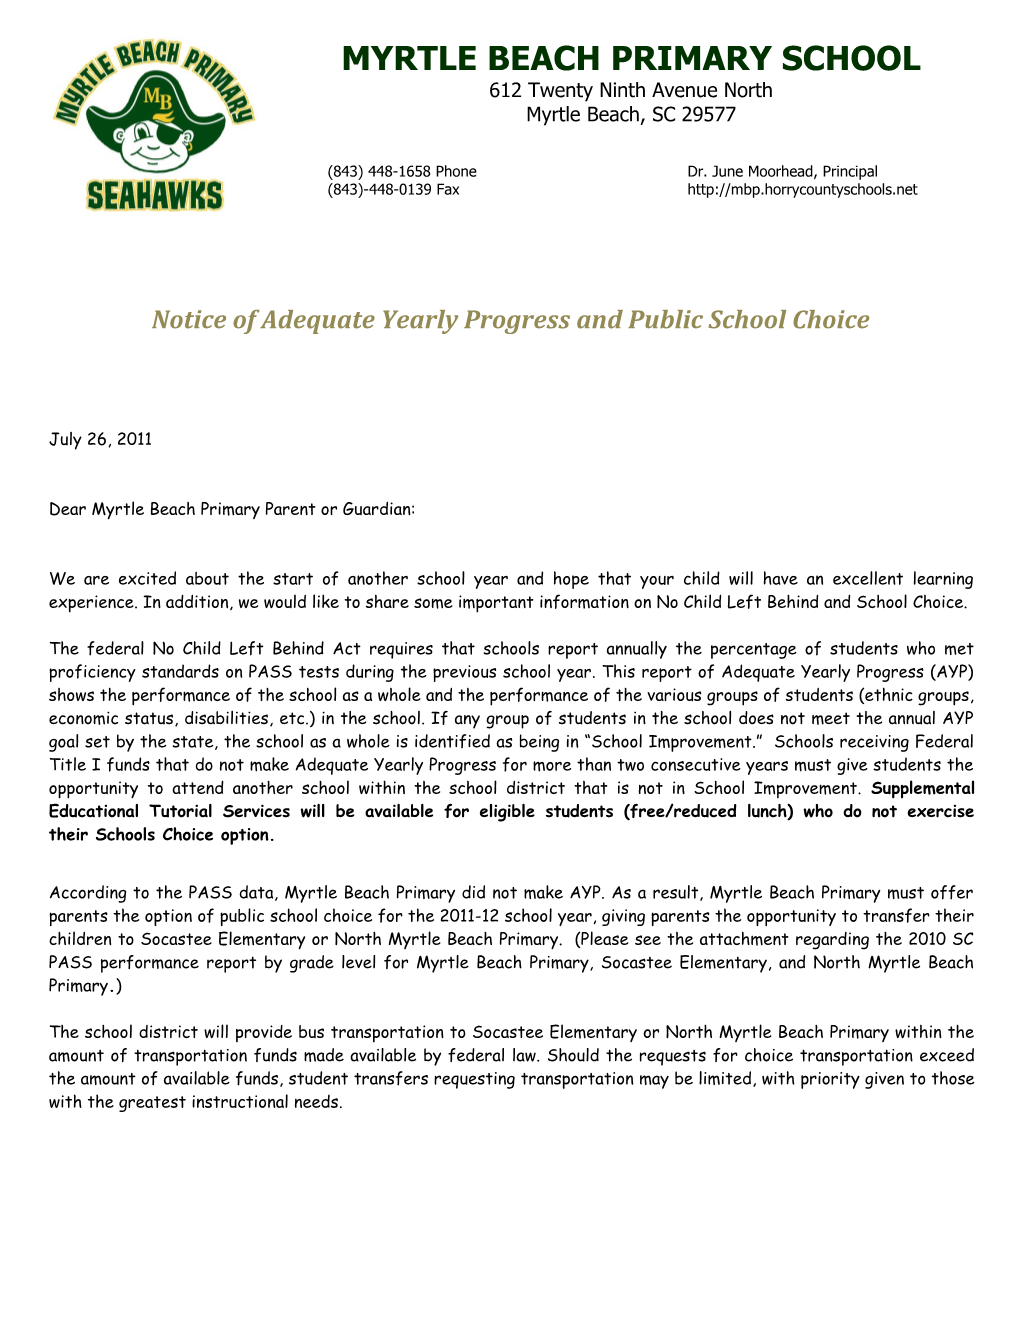 Notice of Adequate Yearly Progress and Public School Choice